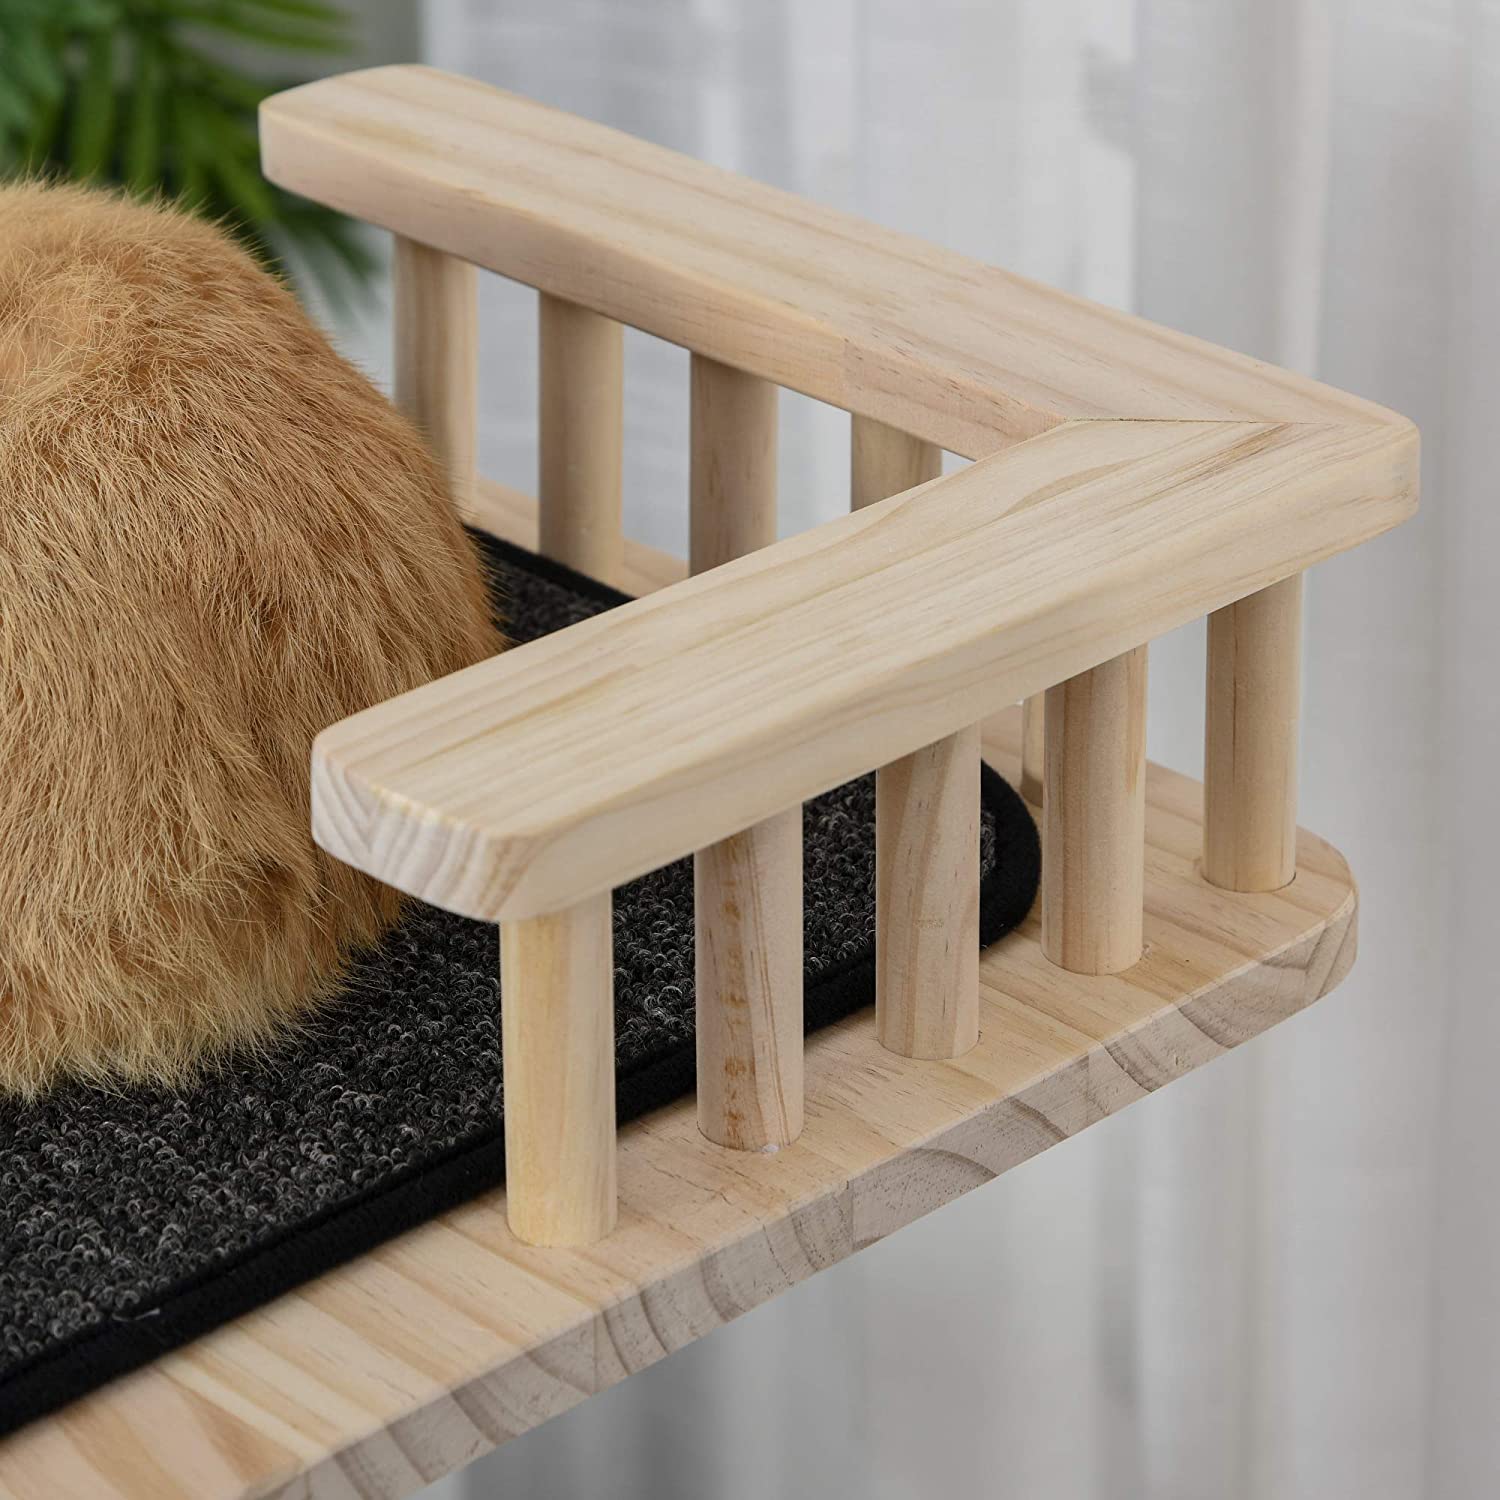 Cat Tower With Running Wheel - Cat tree with hamster wheel